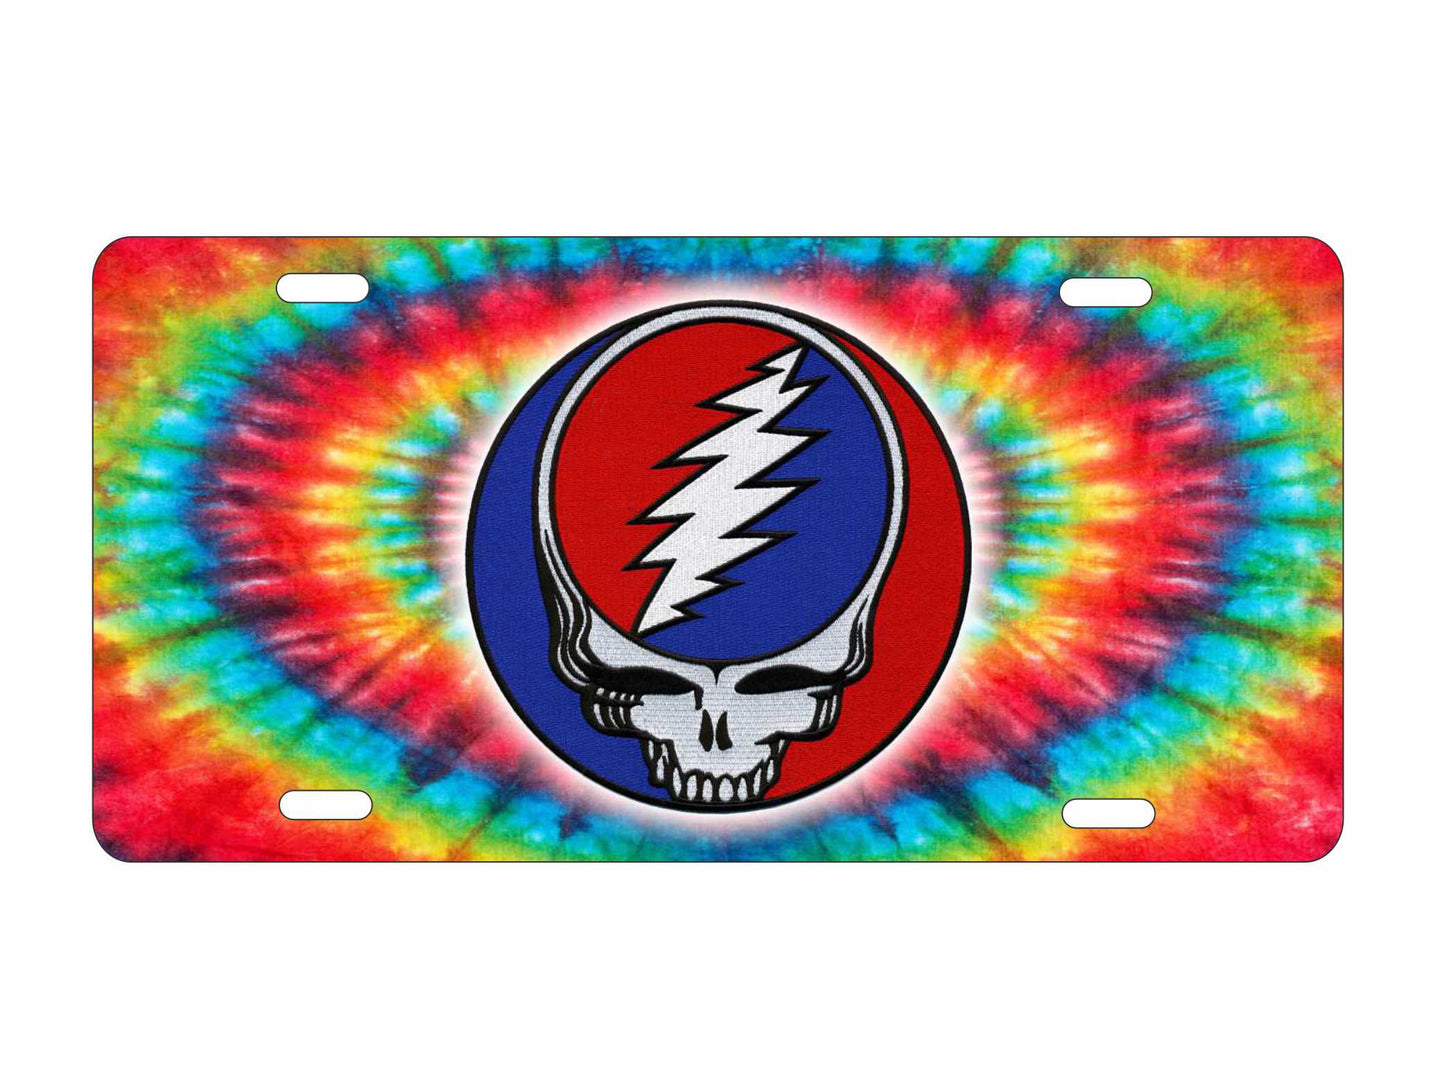 steal your face on a tie dye Background novelty front license plate Decorative aluminum vanity car tag